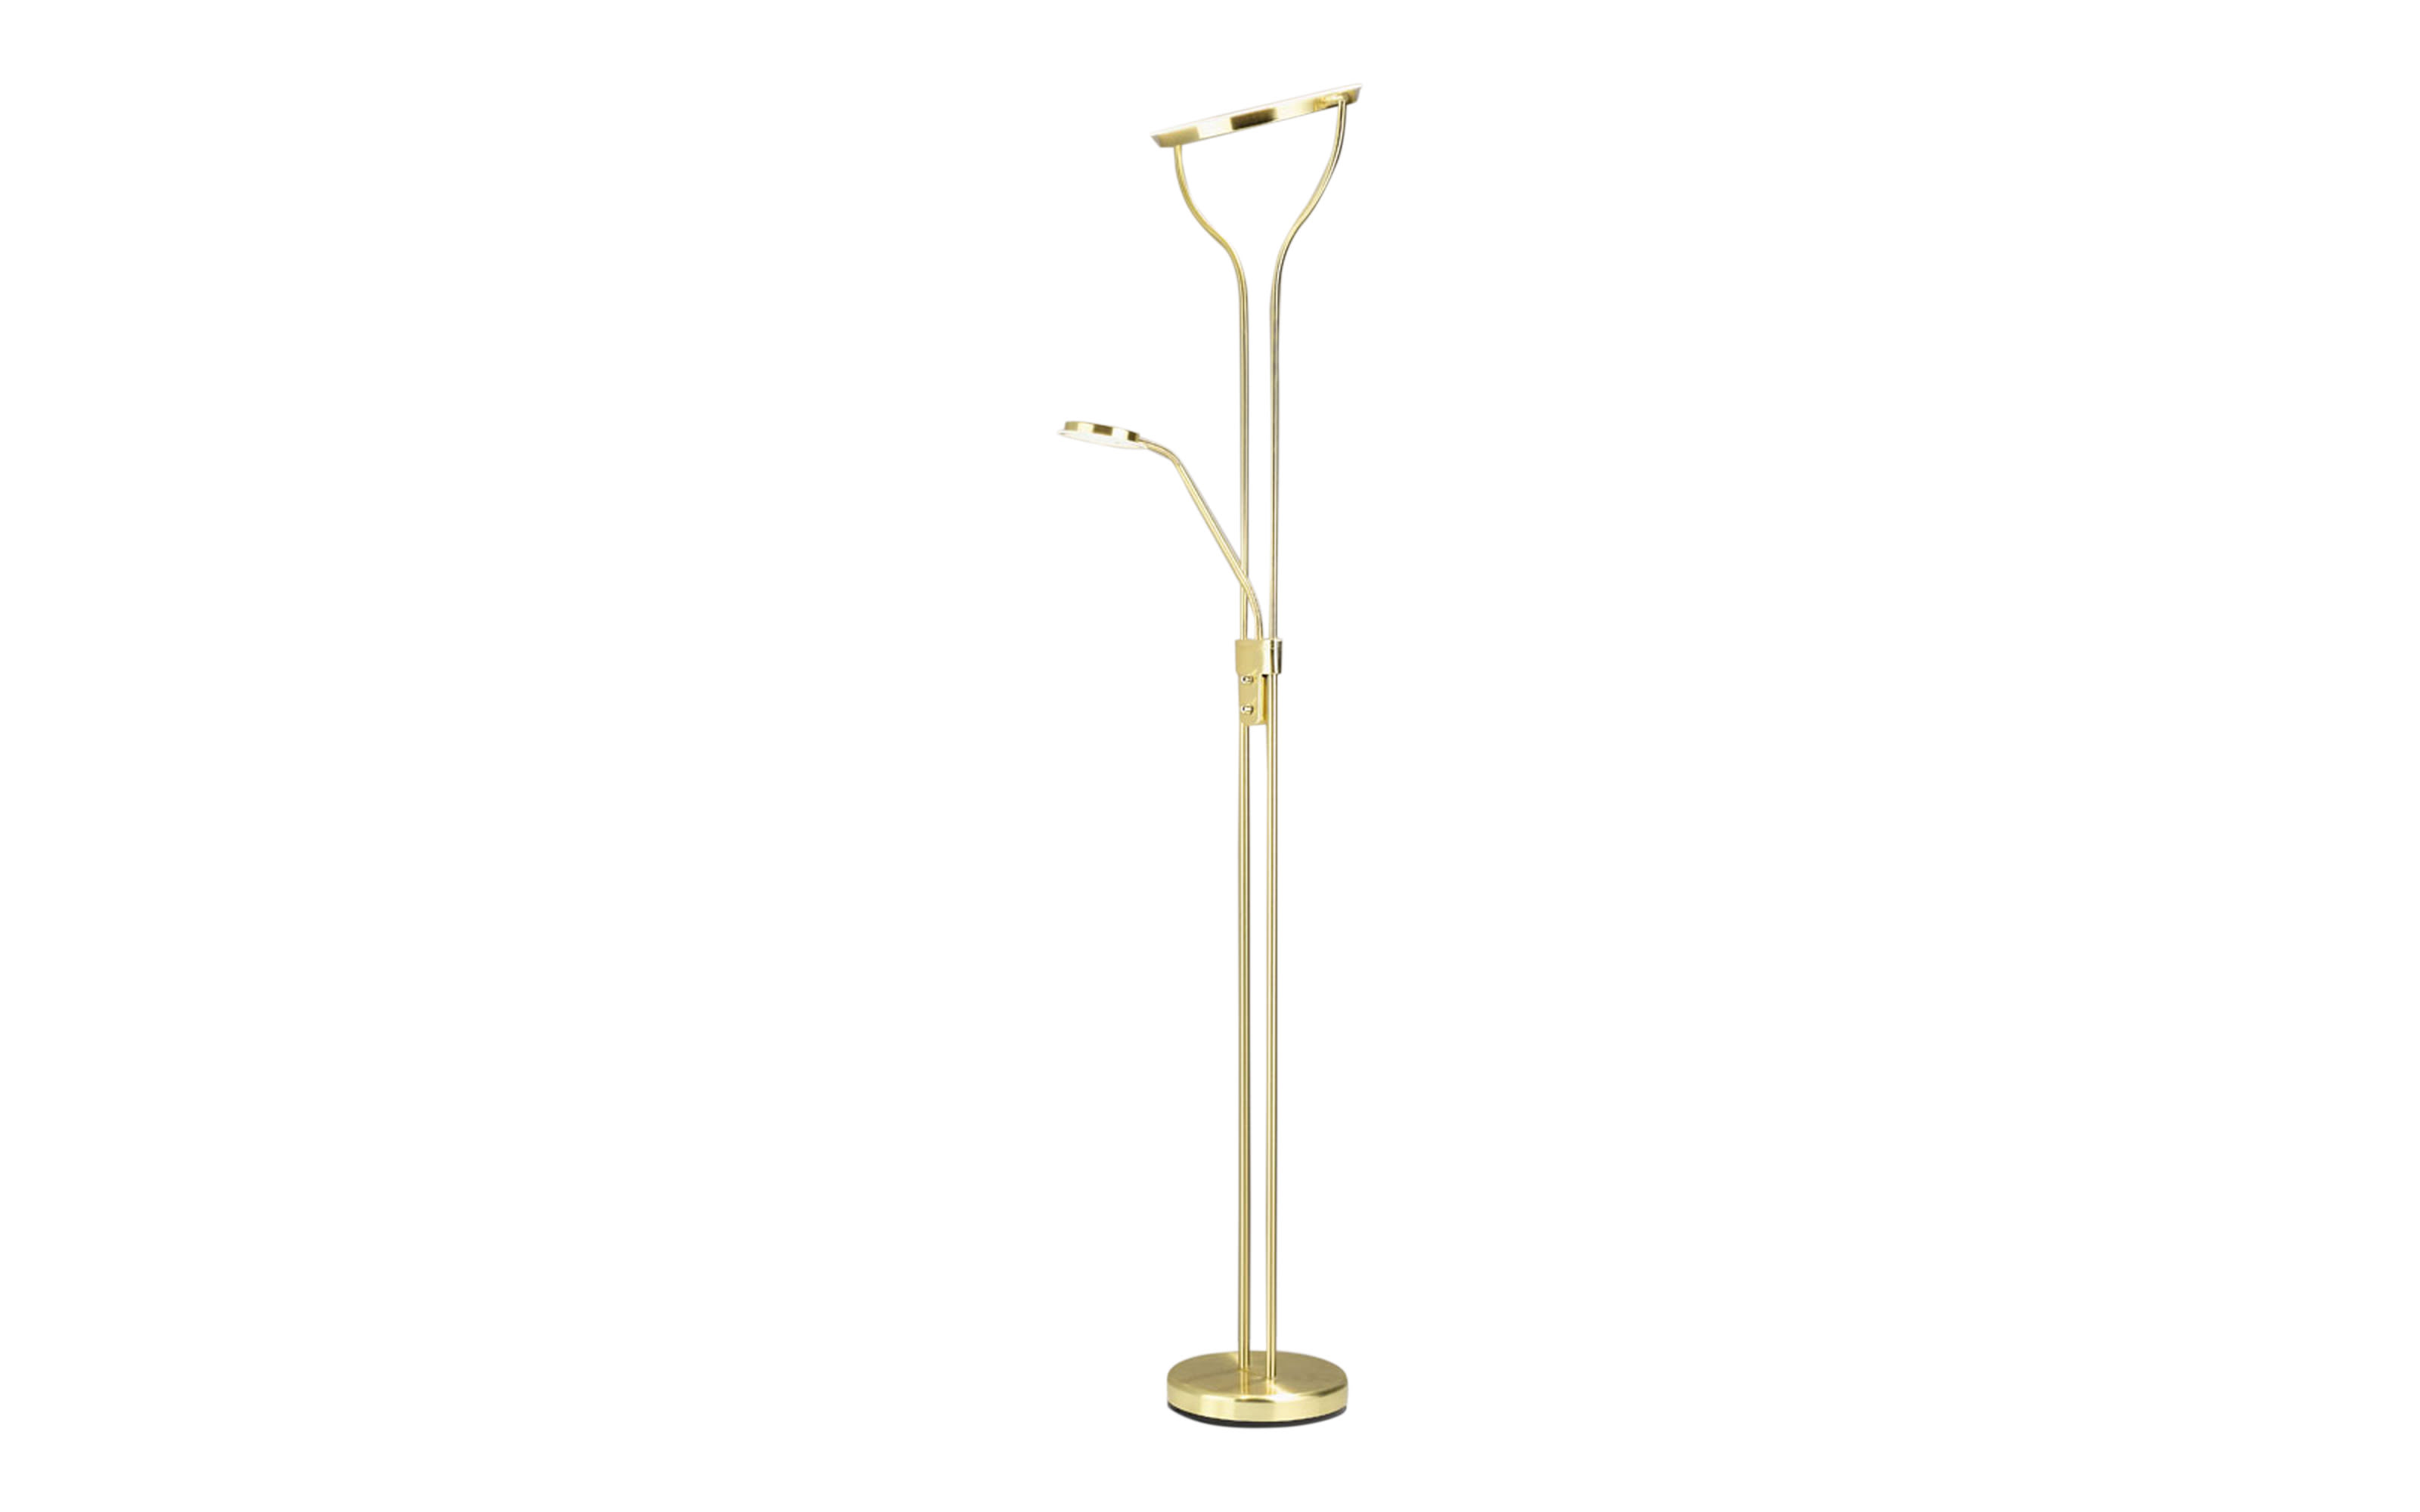 LED-Standleuchte Seattle in goldfarbig, 180 cm